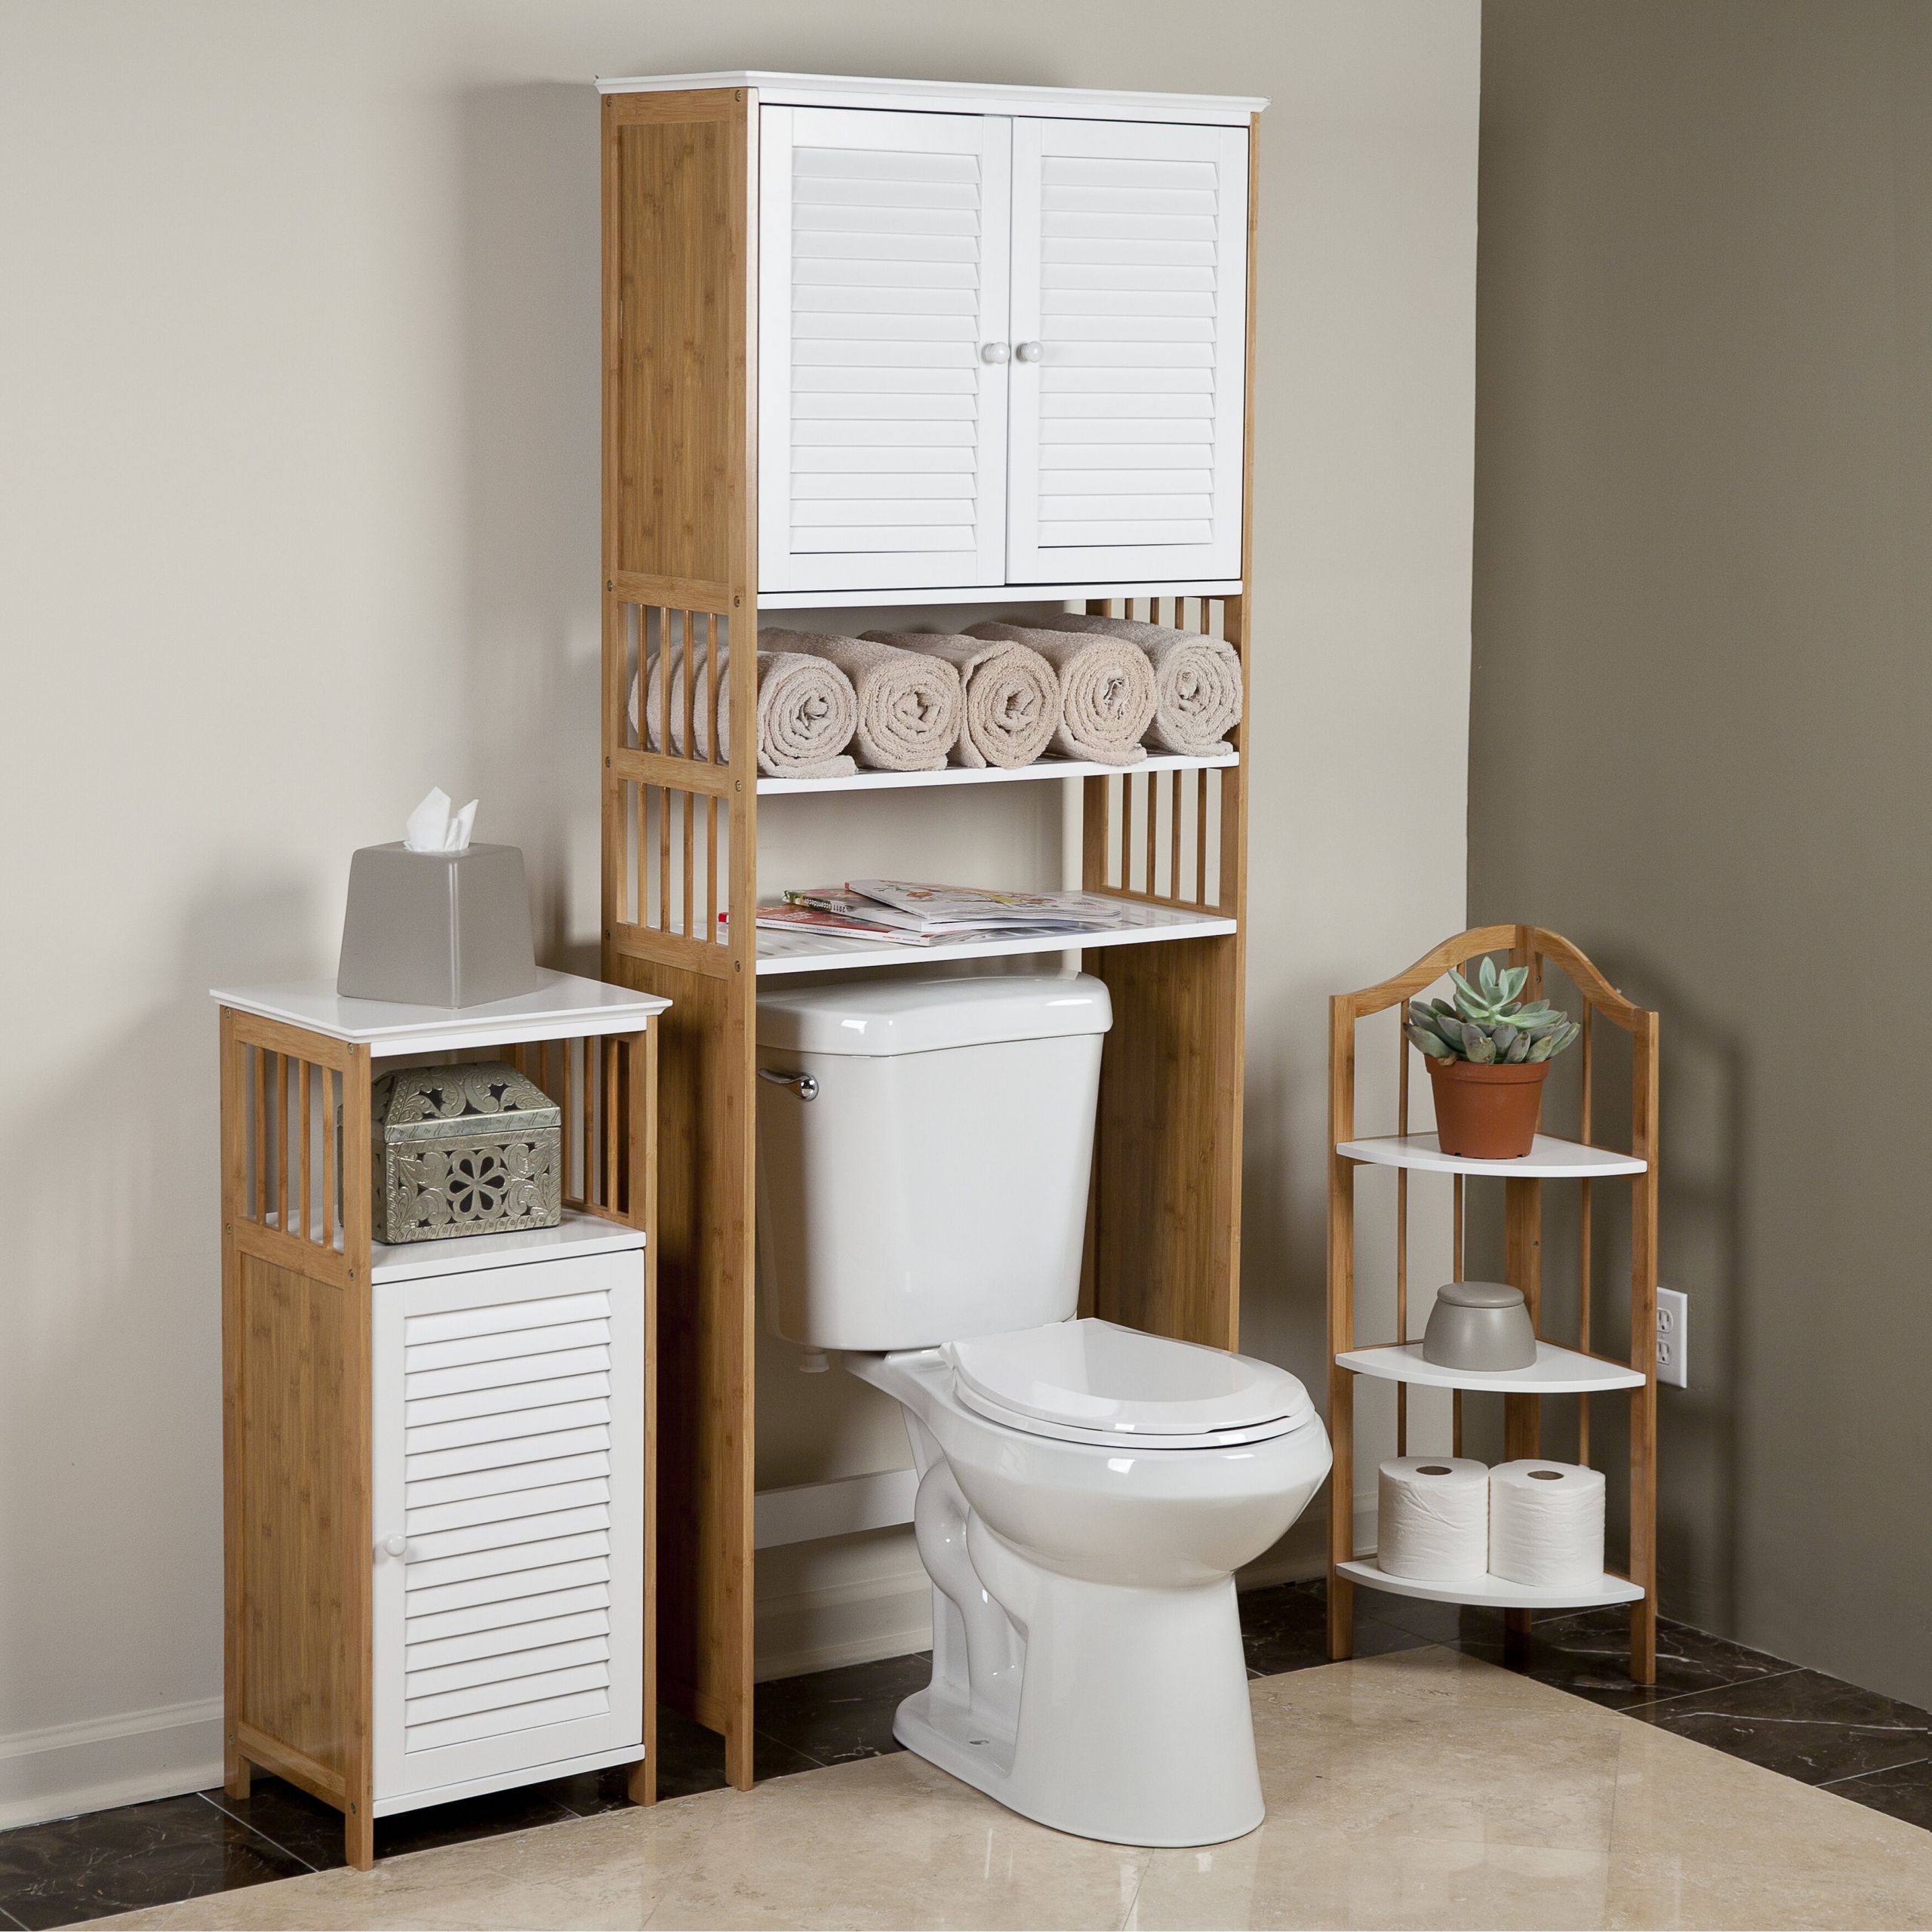 Bathroom Cabinets Over The Toilet
 DanyaB Bamboo Bathroom 27" x 71" Free Standing Over the